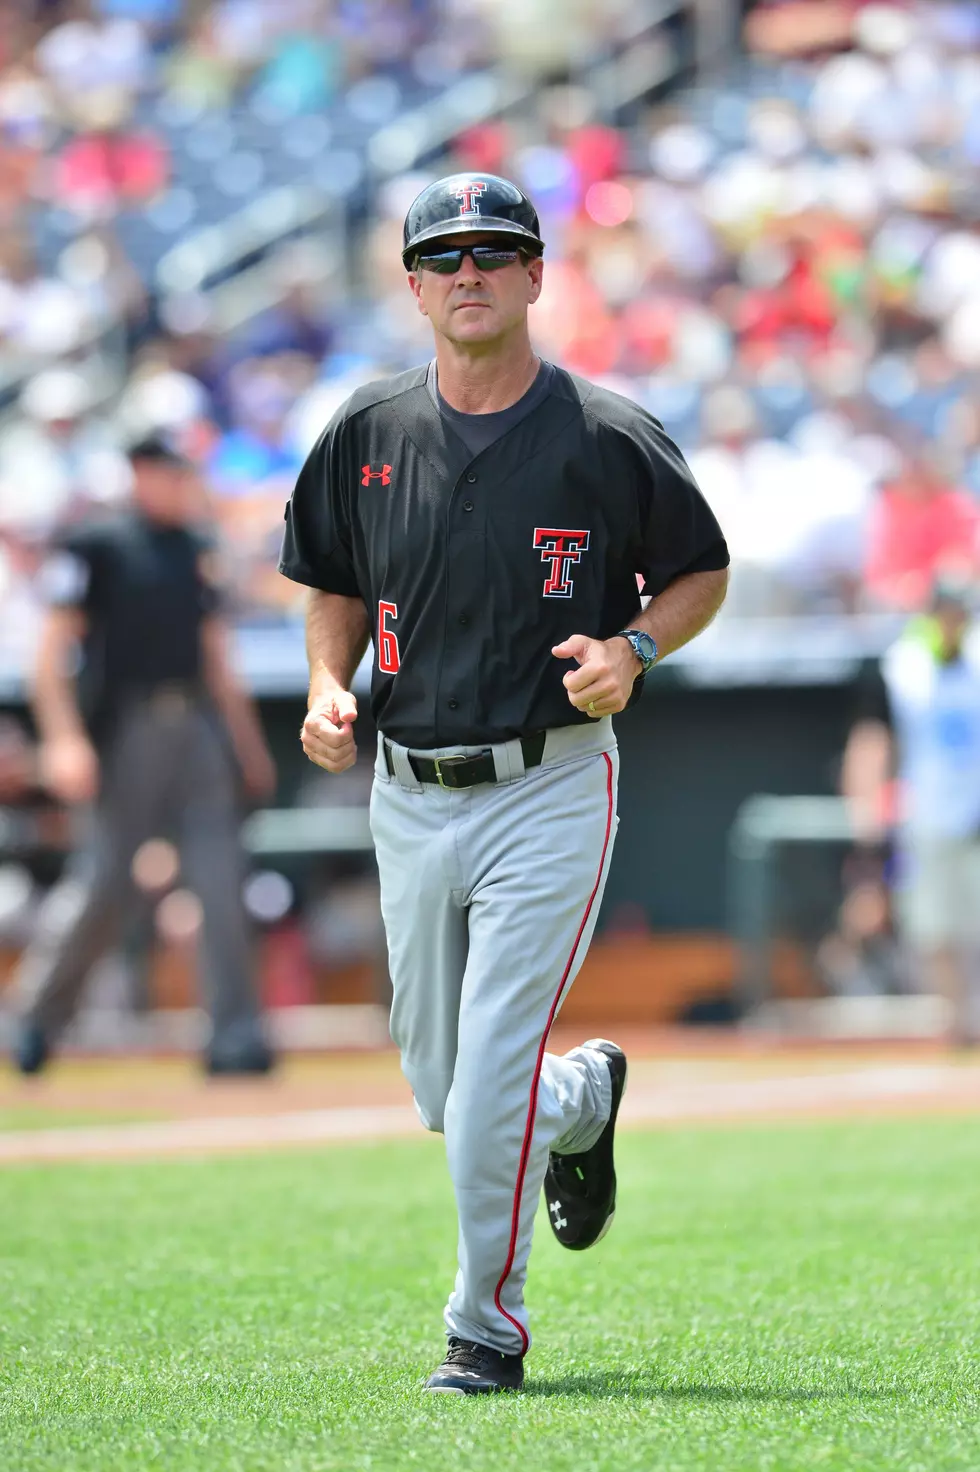 Tadlock Earns Multi-Year Contract Extension